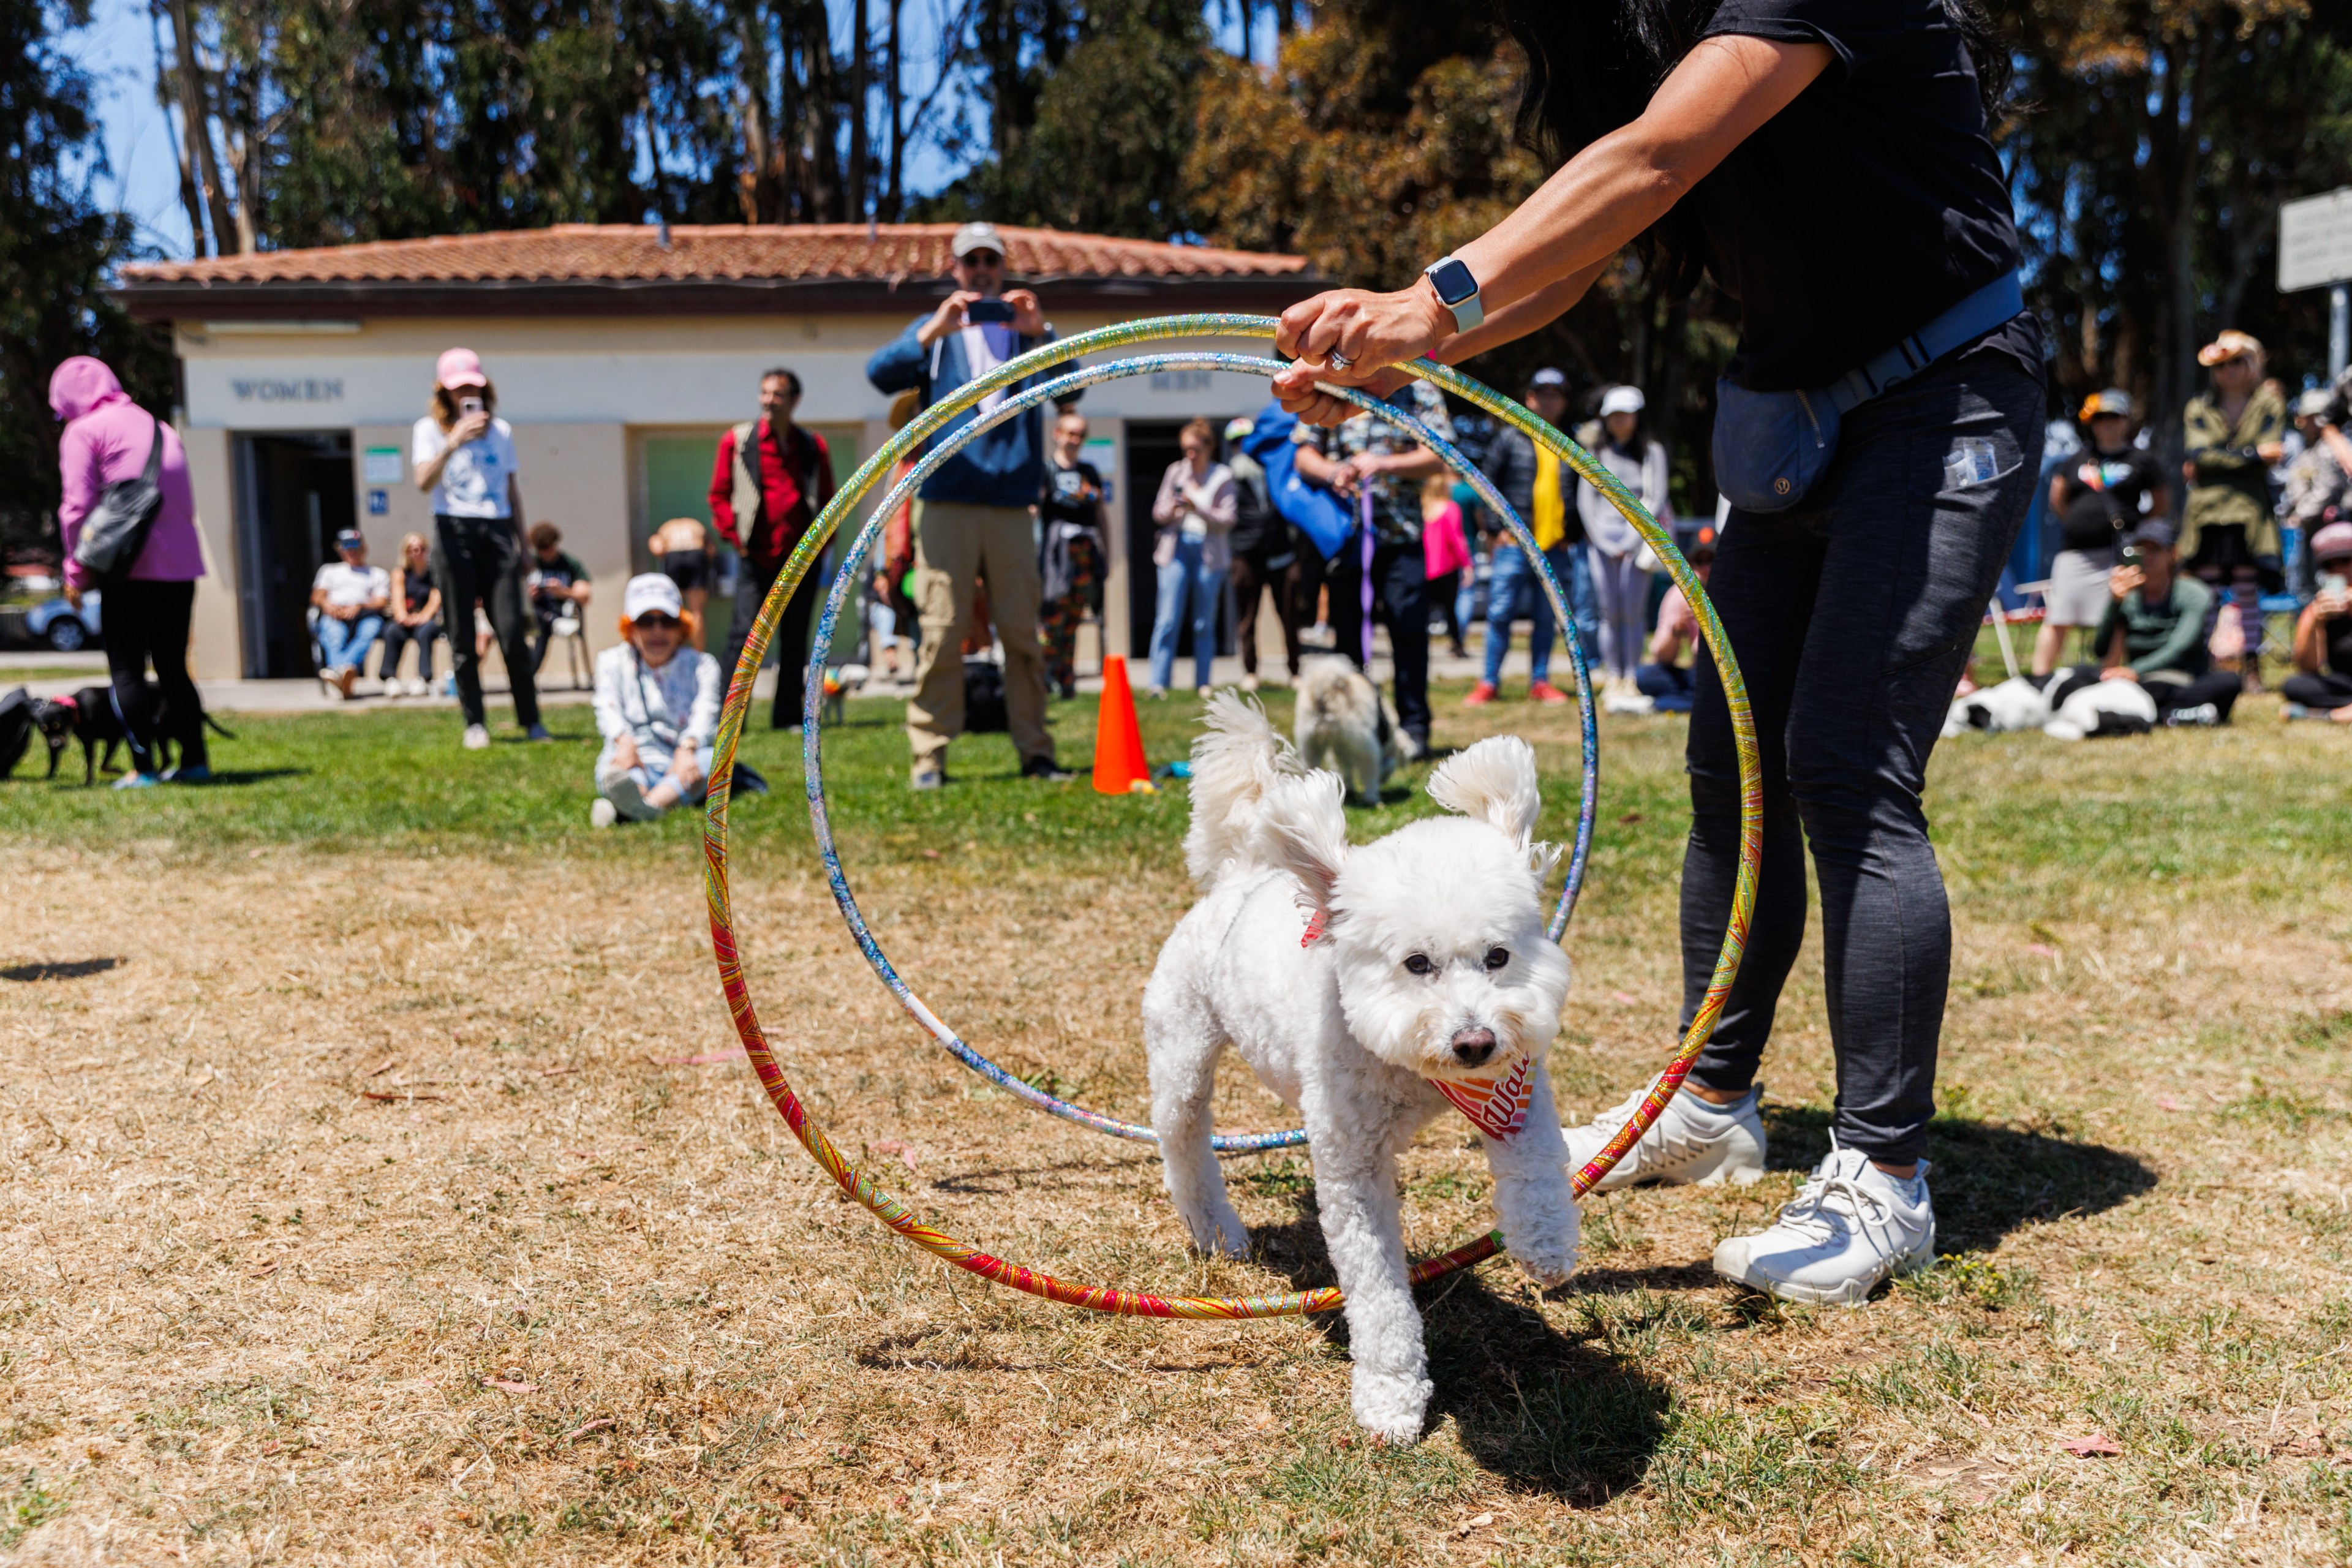 A small white dog is jumping through two colorful hula hoops held by a person, while a group of people watch in an outdoor park setting.